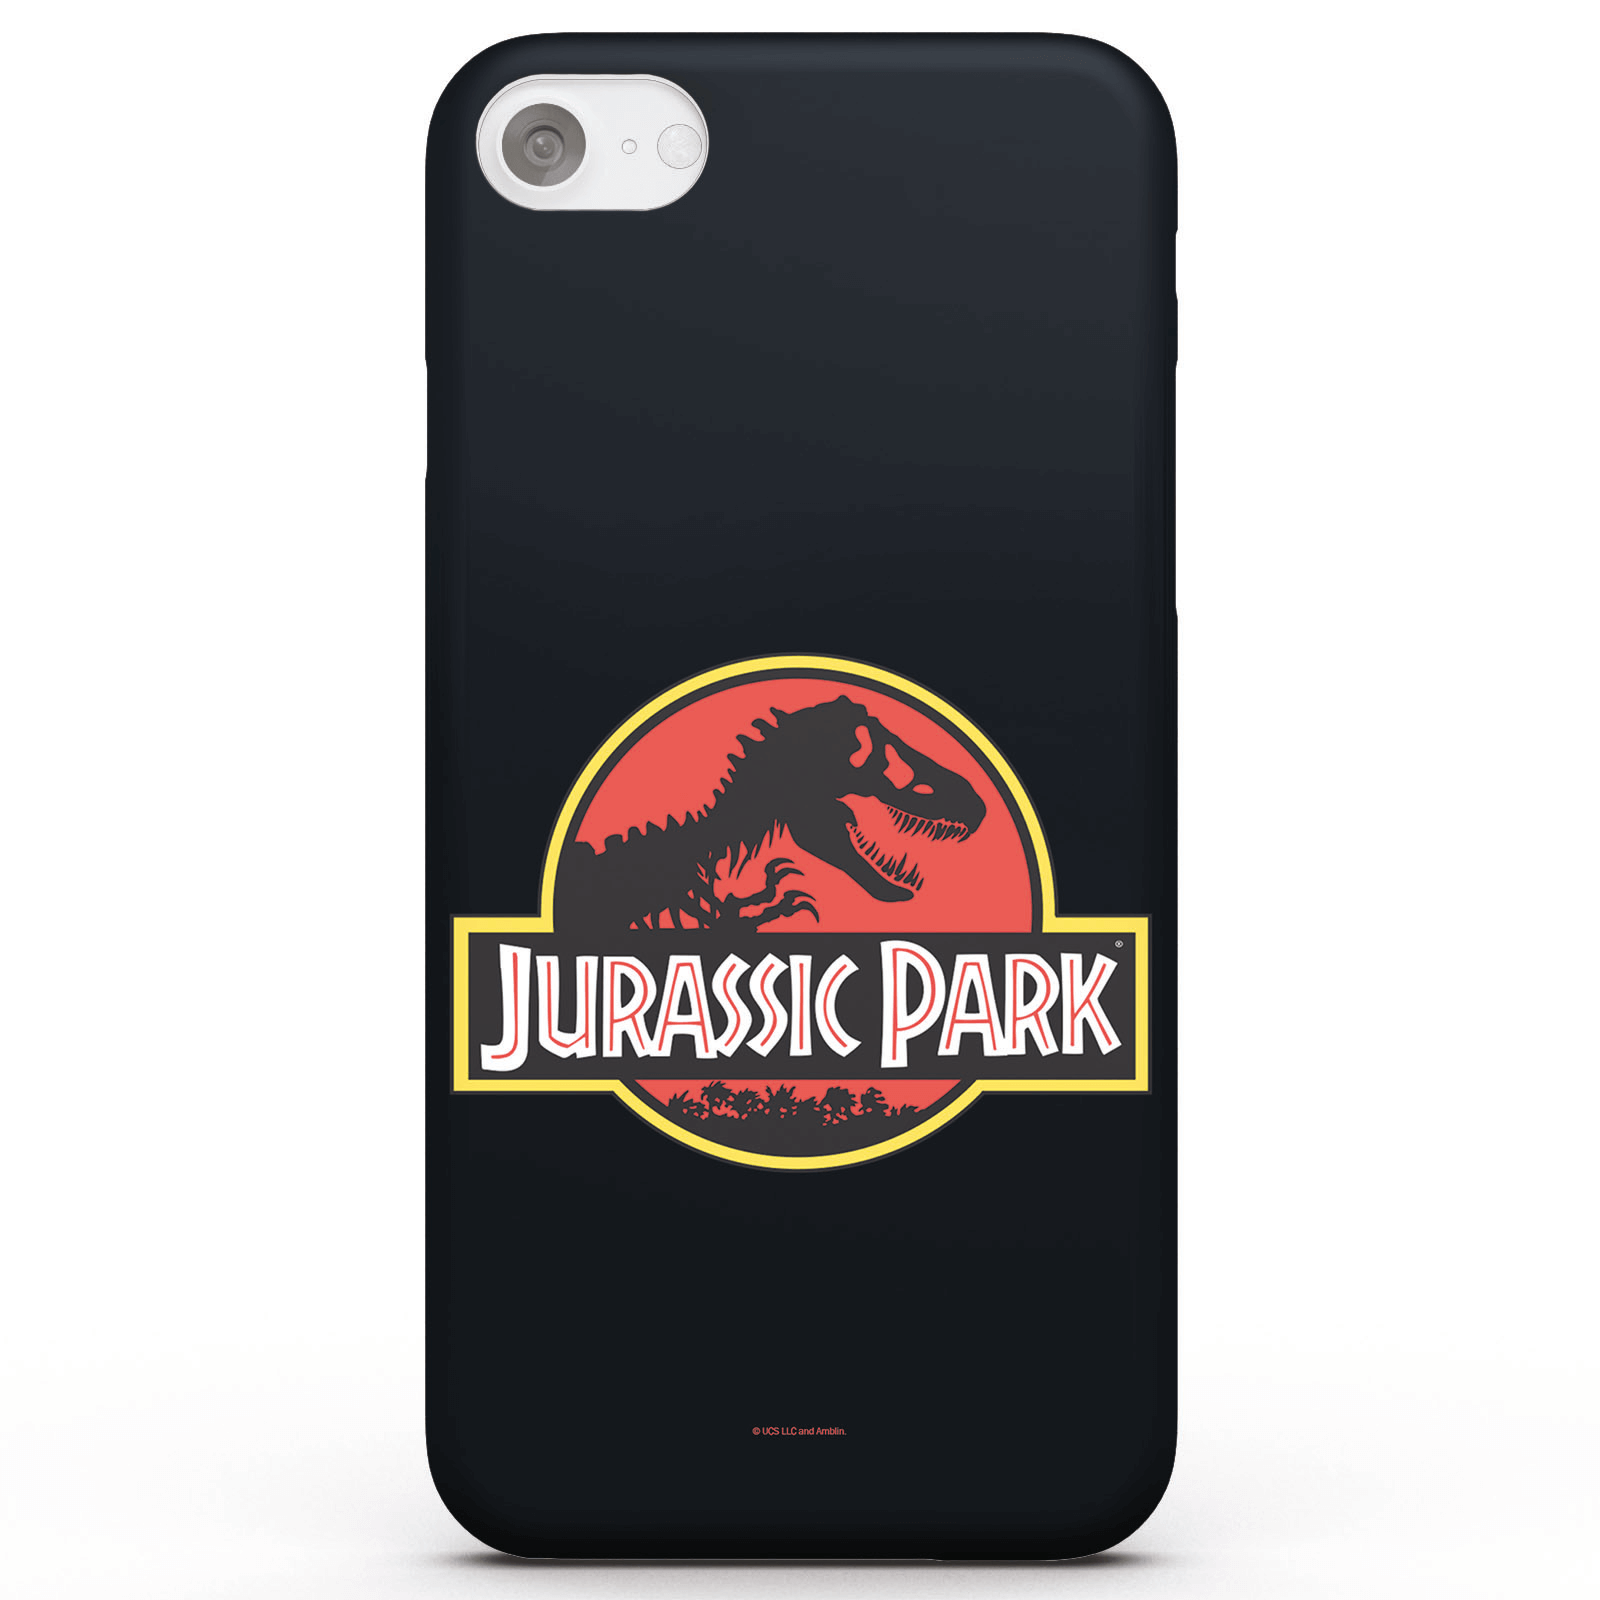 Jurassic Park Logo Phone Case for iPhone and Android - Samsung Note 8 - Tough Case - Gloss